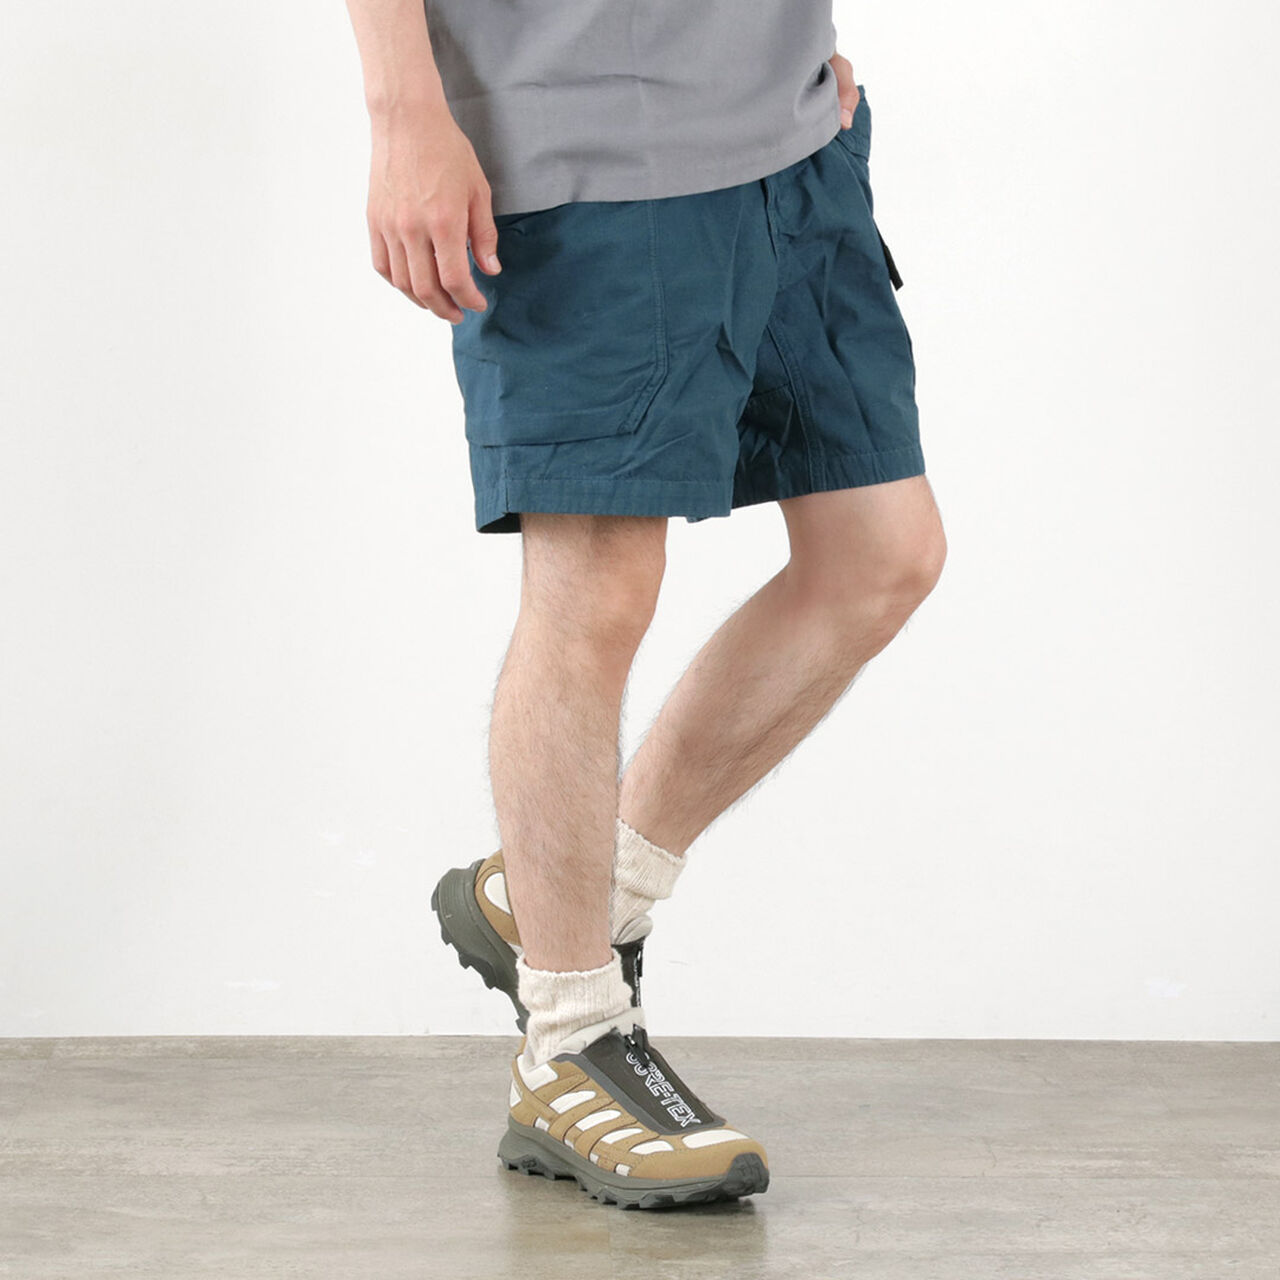 Ultimate Shorts Hemp Cotton Recycled Polyester Weather Cloth,NavyPeony, large image number 0